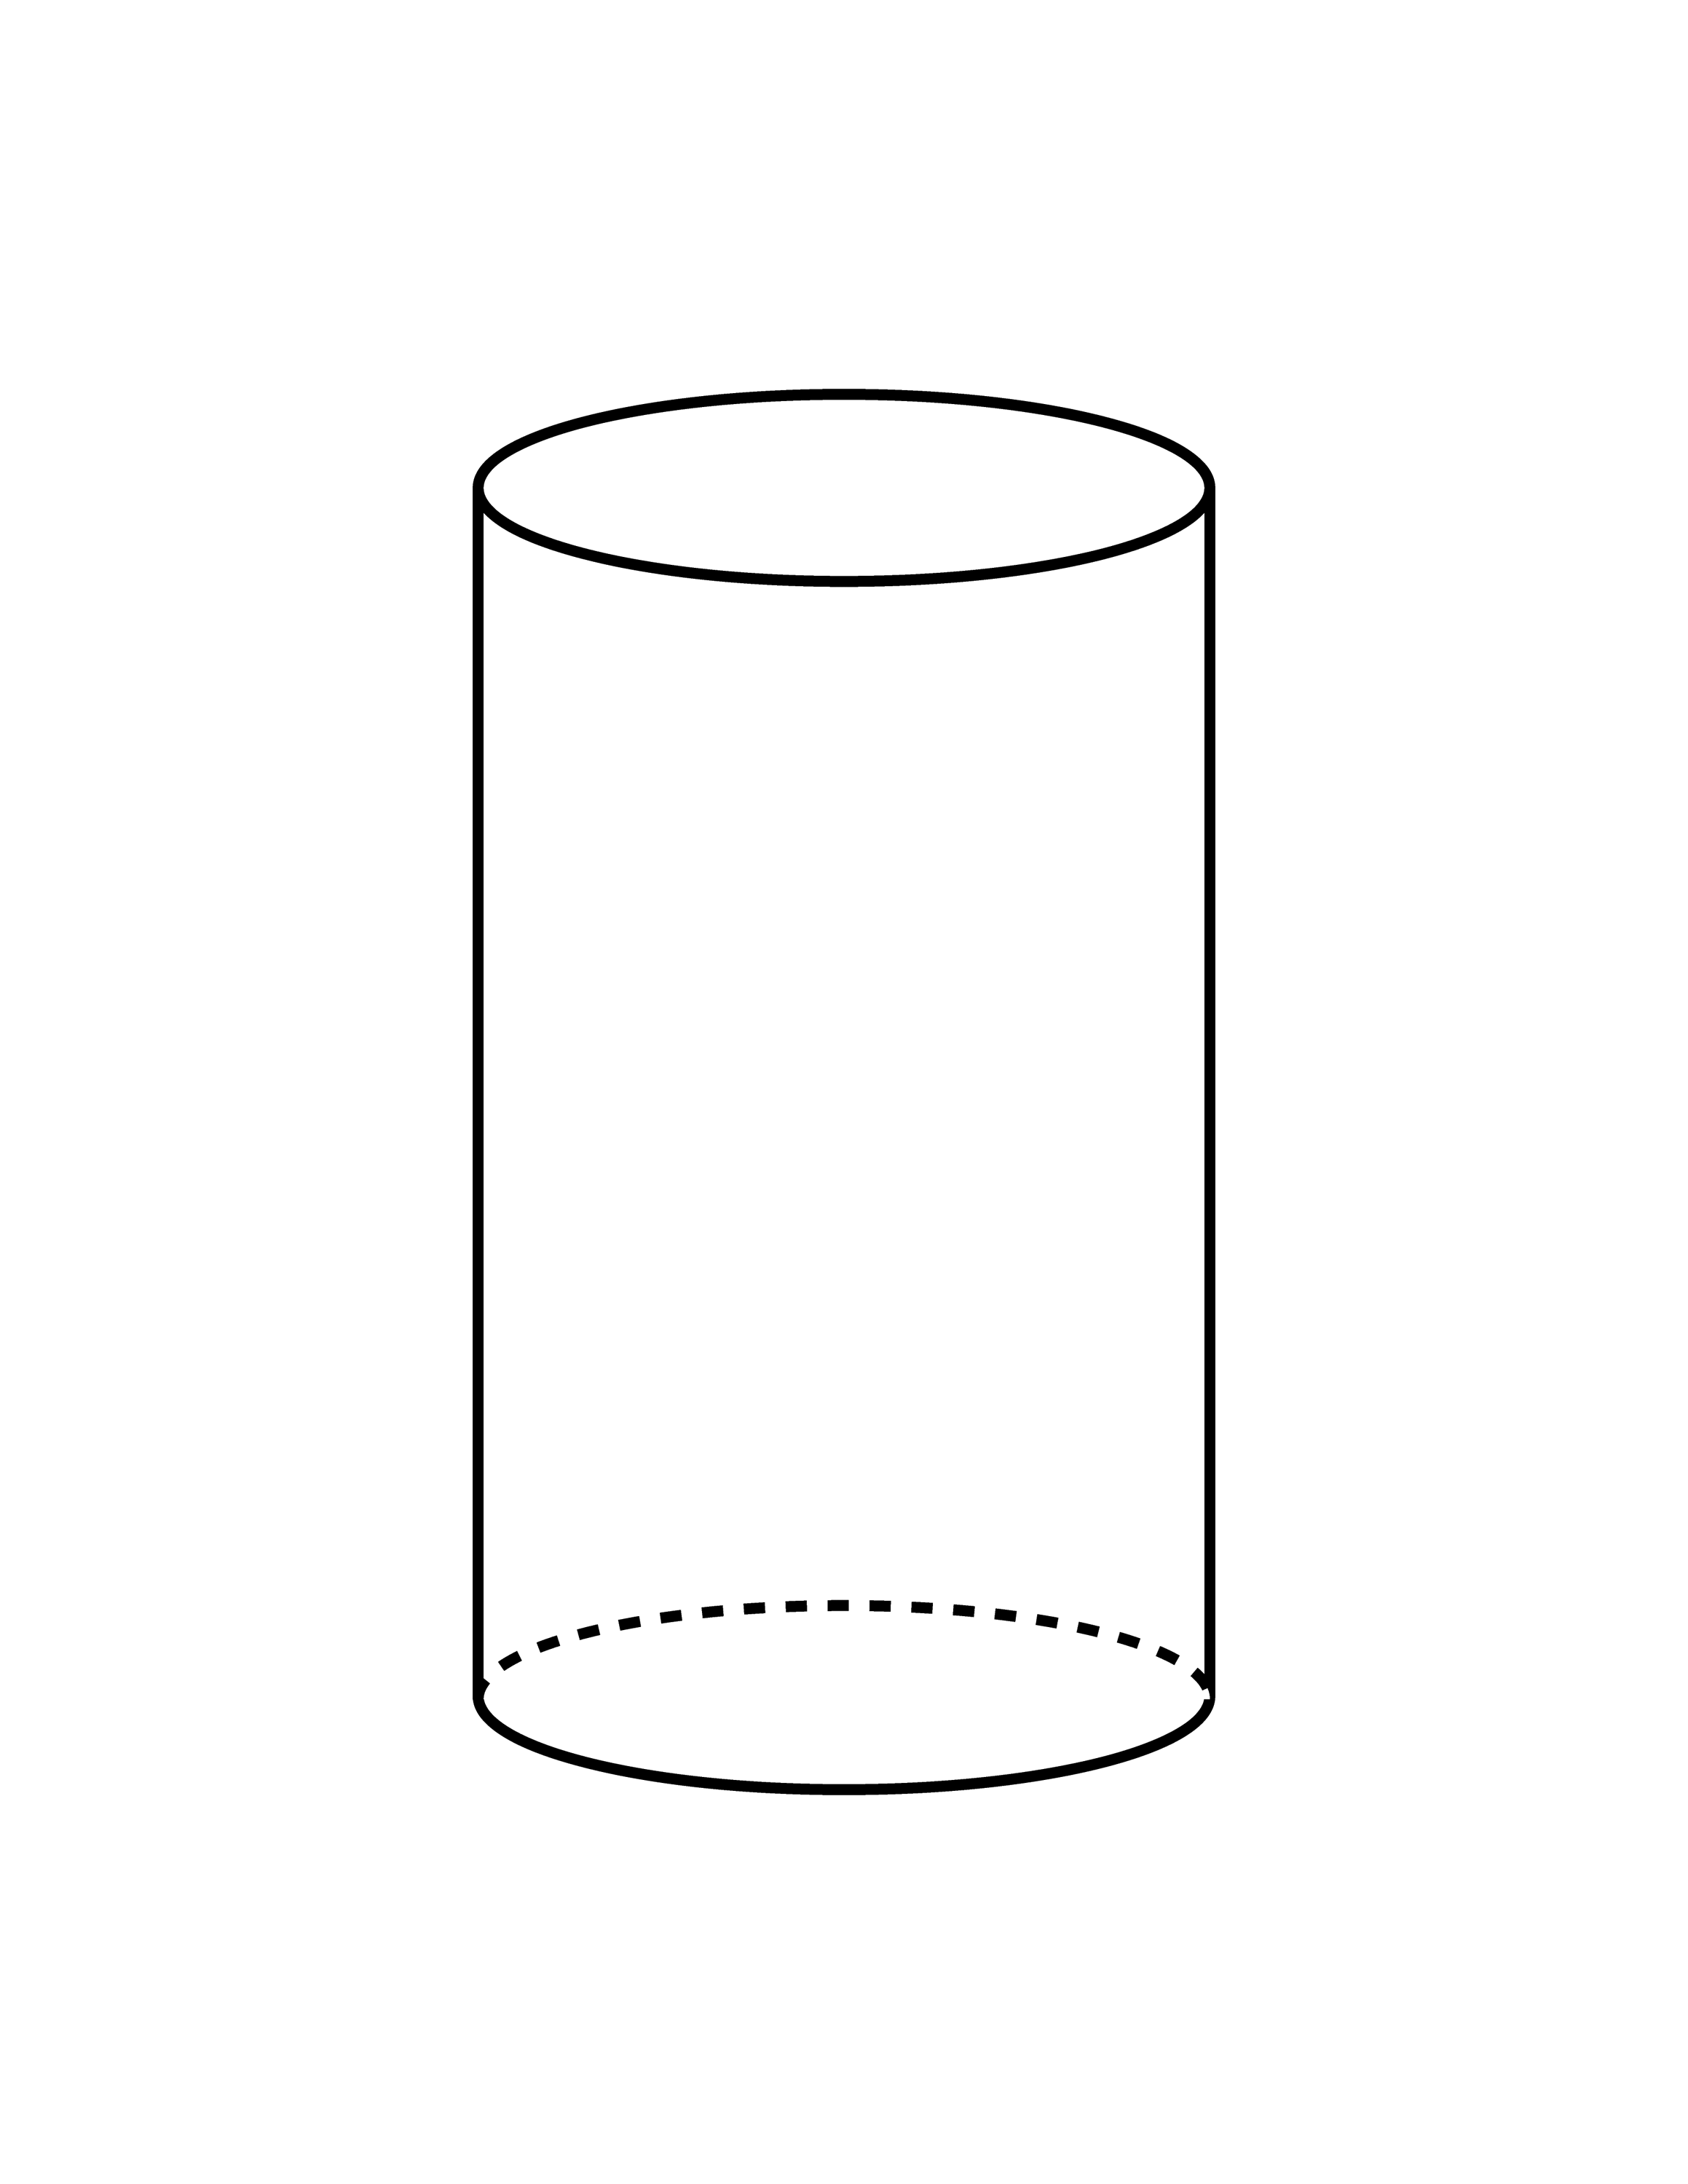 Flashcard Of A Cylinder ClipArt ETC 3500 | Hot Sex Picture